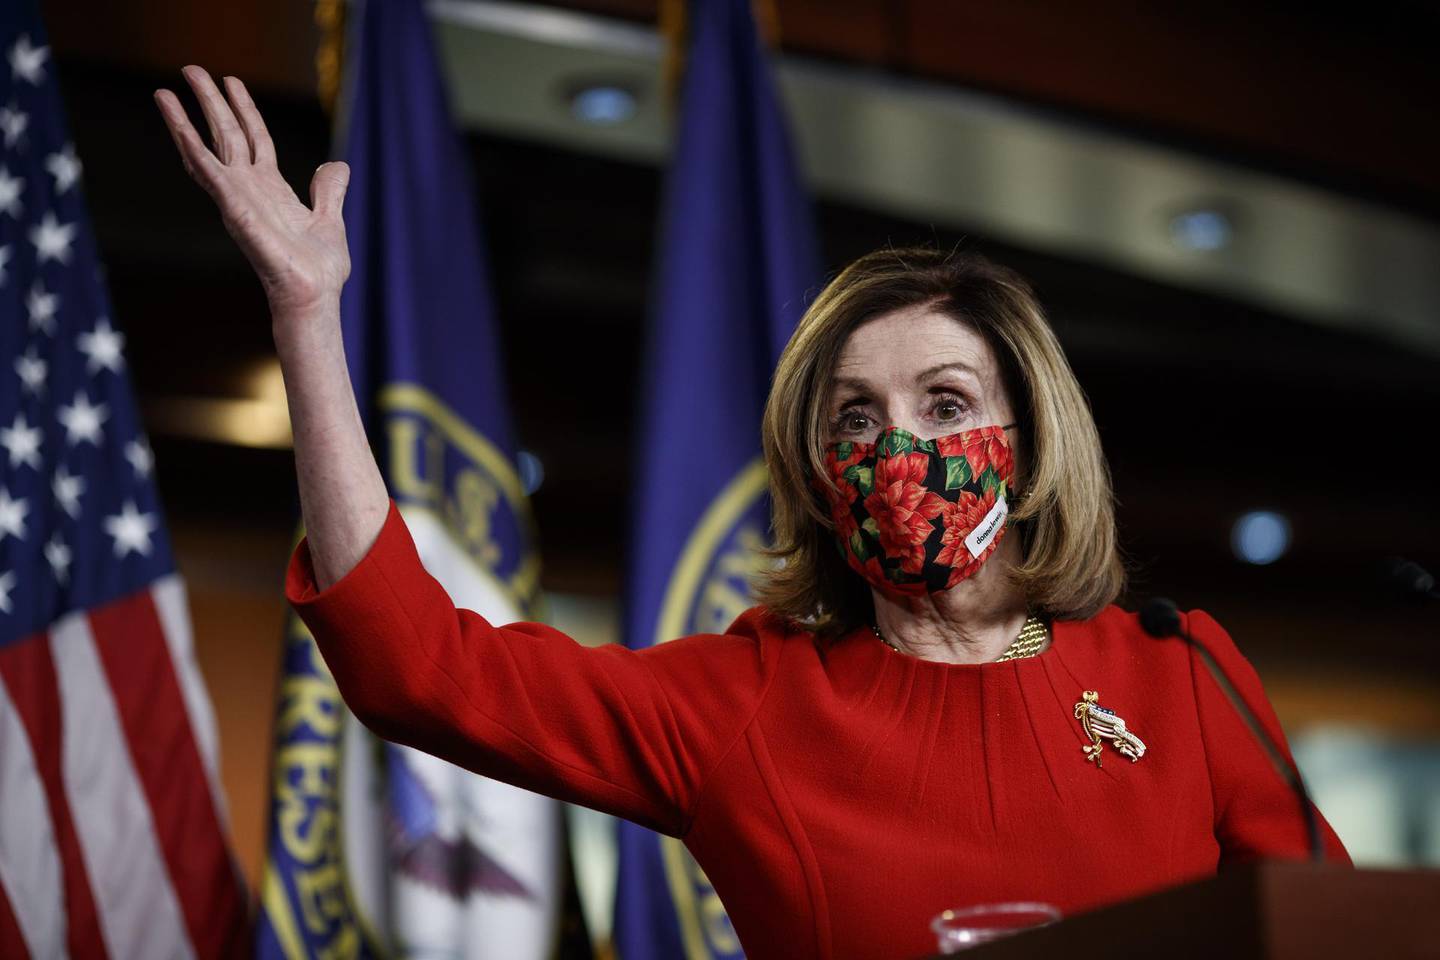 U.S. House Speaker Nancy Pelosi, a Democrat from California, wears a protective mask while speaking during a news conference at the U.S. Capitol Building in Washington, D.C., U.S., on Sunday, Dec. 20, 2020. Congressional leaders reached a deal on a roughly $900 billion spending package to bolster the U.S. economy amid the continued coronavirus pandemic giving lawmakers a short timetable to review and pass the second largest economic-rescue measure in the nation's history. Photographer: Ting Shen/Bloomberg